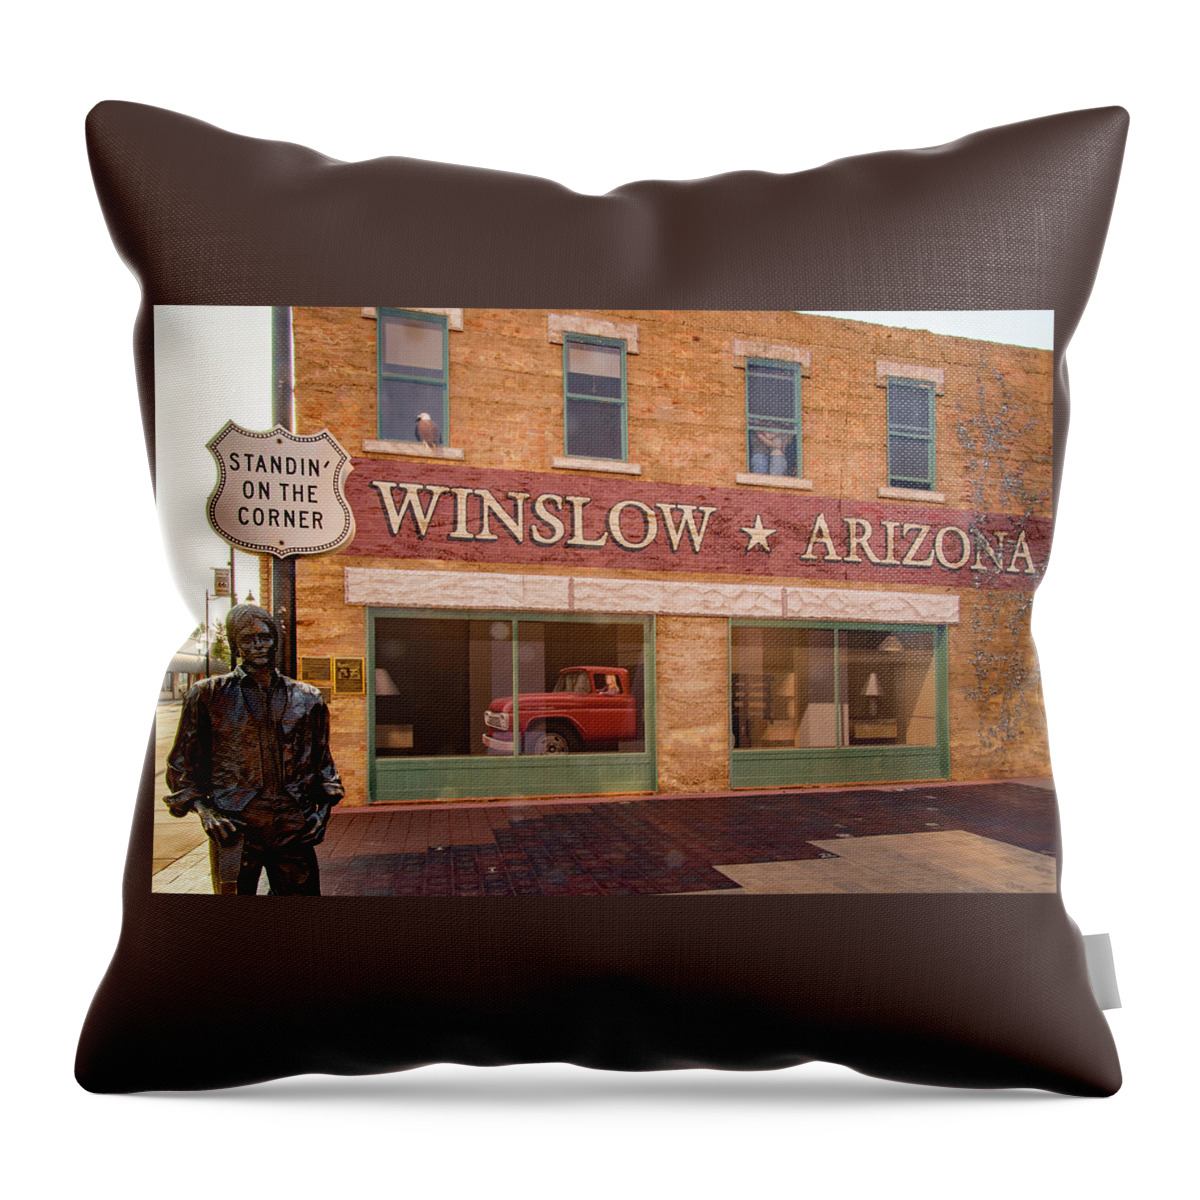  Throw Pillow featuring the photograph Standin' On The Corner by Paul LeSage